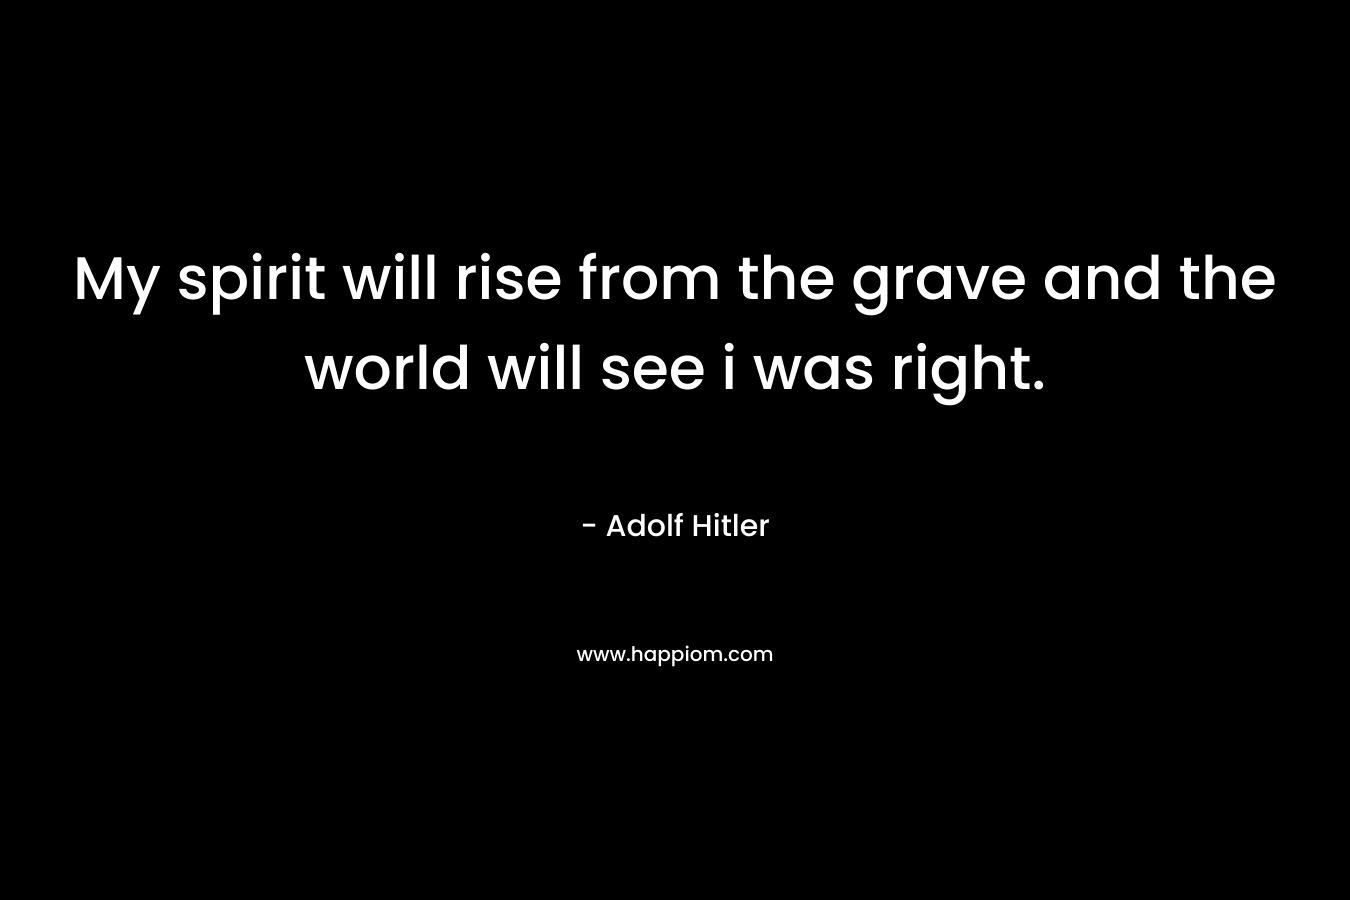 My spirit will rise from the grave and the world will see i was right. – Adolf Hitler